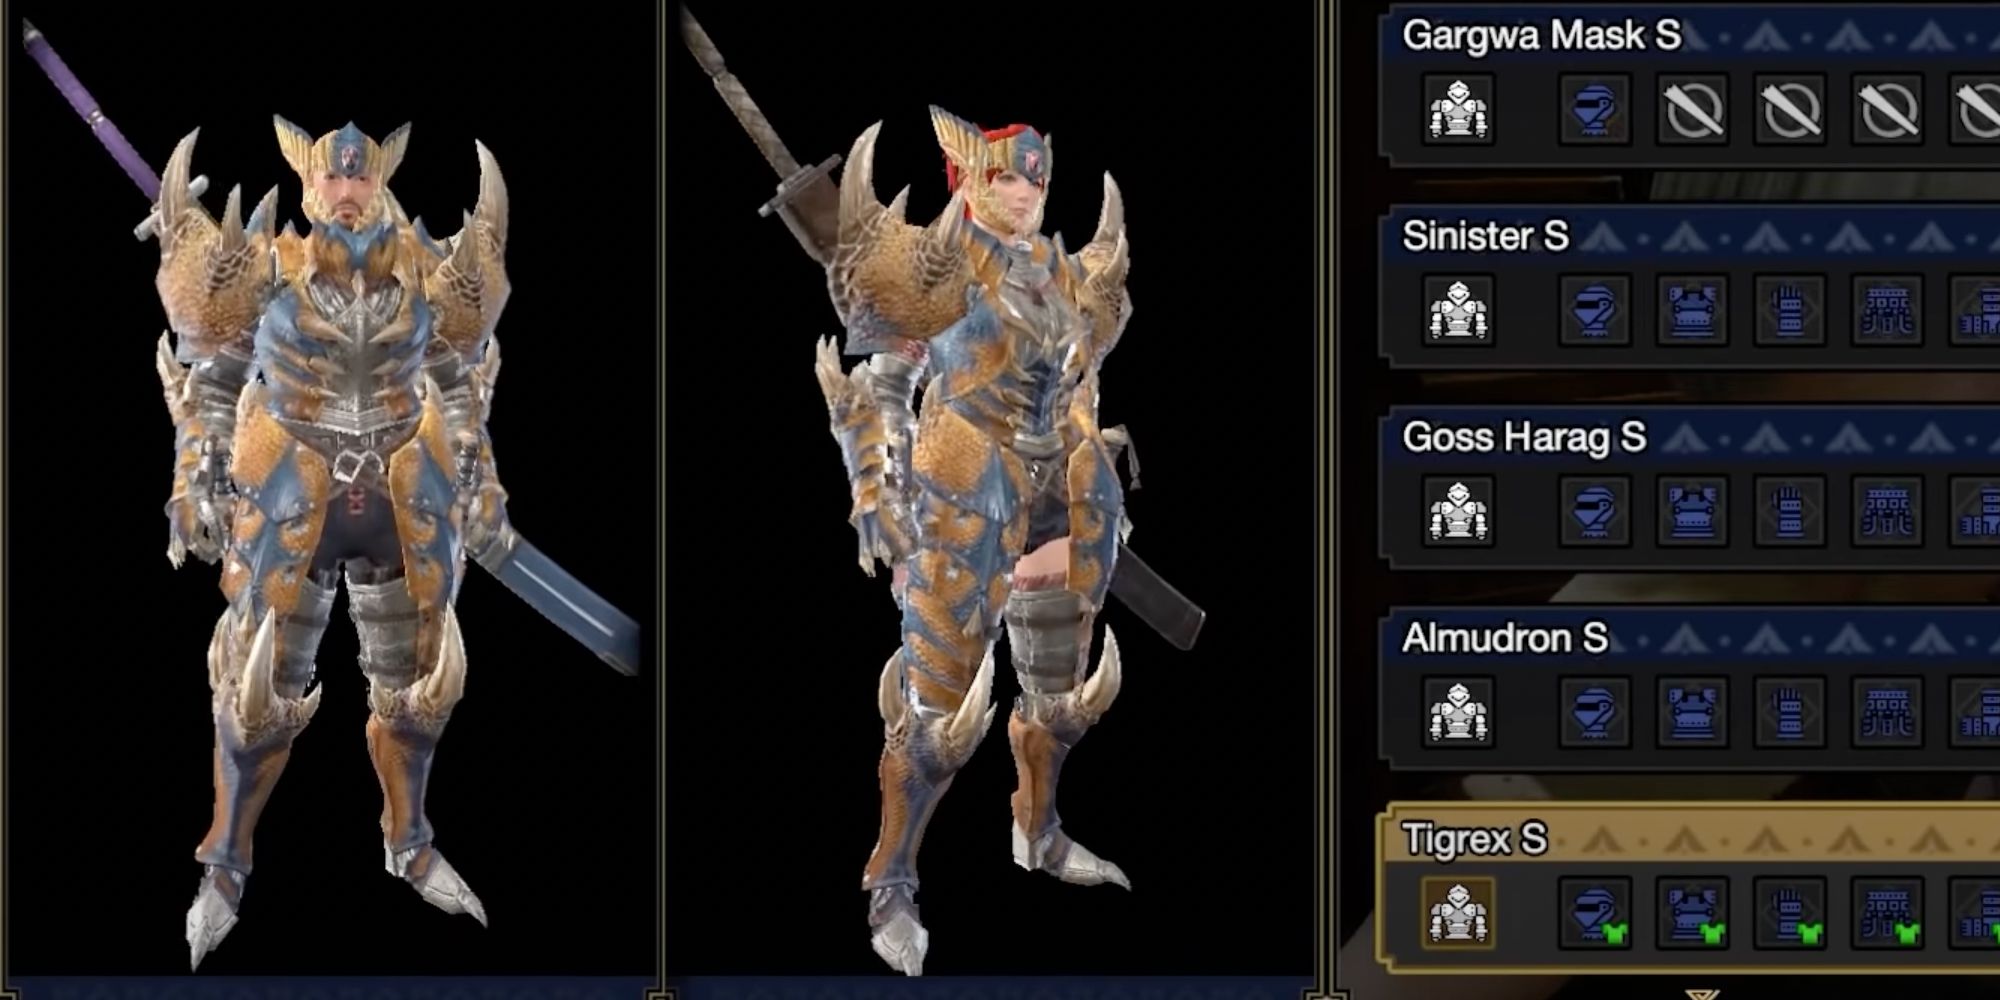 Armor selection screen showing both gendered Hunters in Tigrex armor